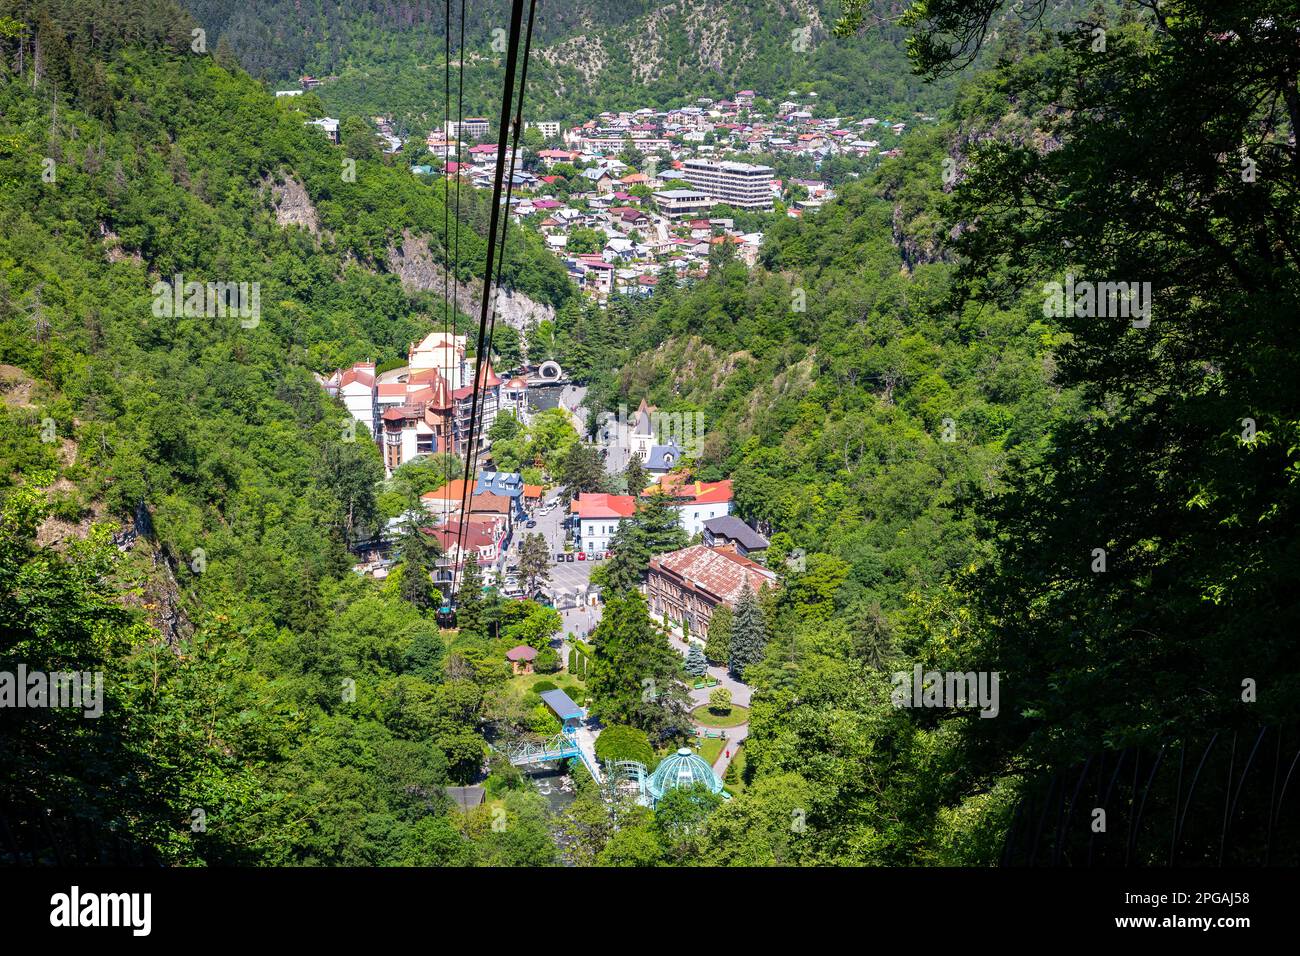 Borjomi Town Aerial View Seen From Cable Car Above The City Resort